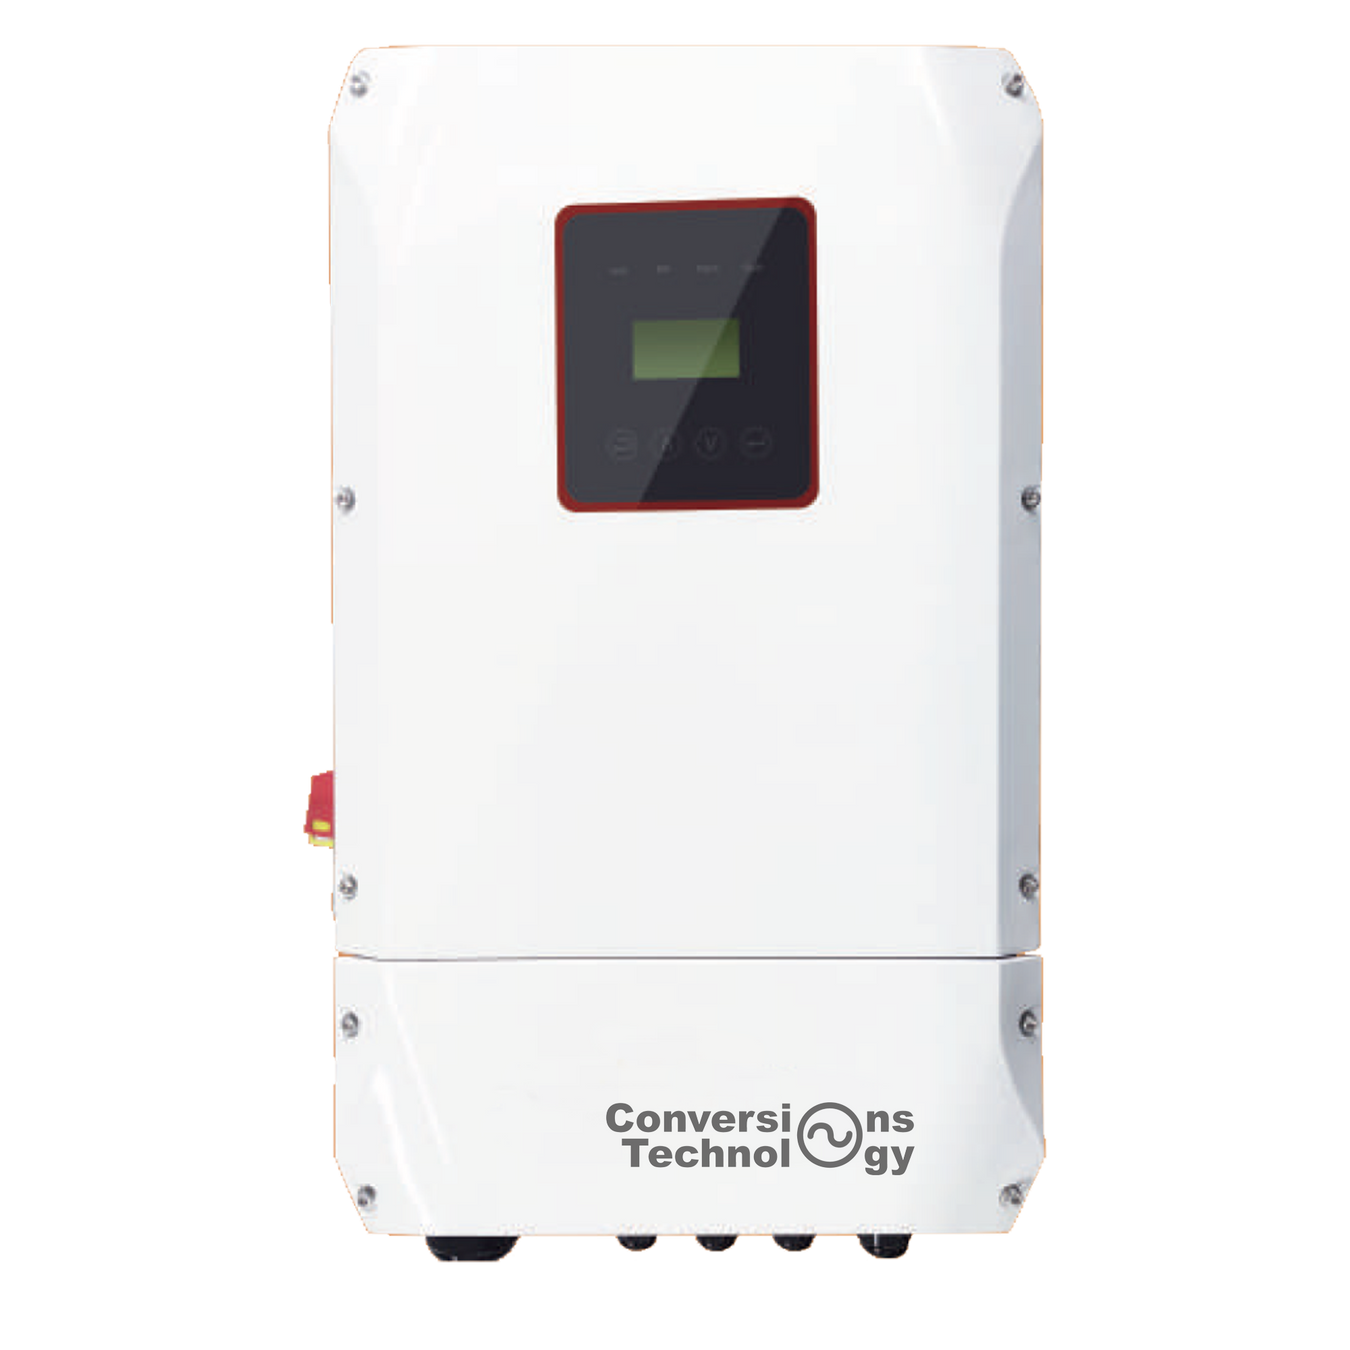 Conversions Technology inverters and inverter chargers